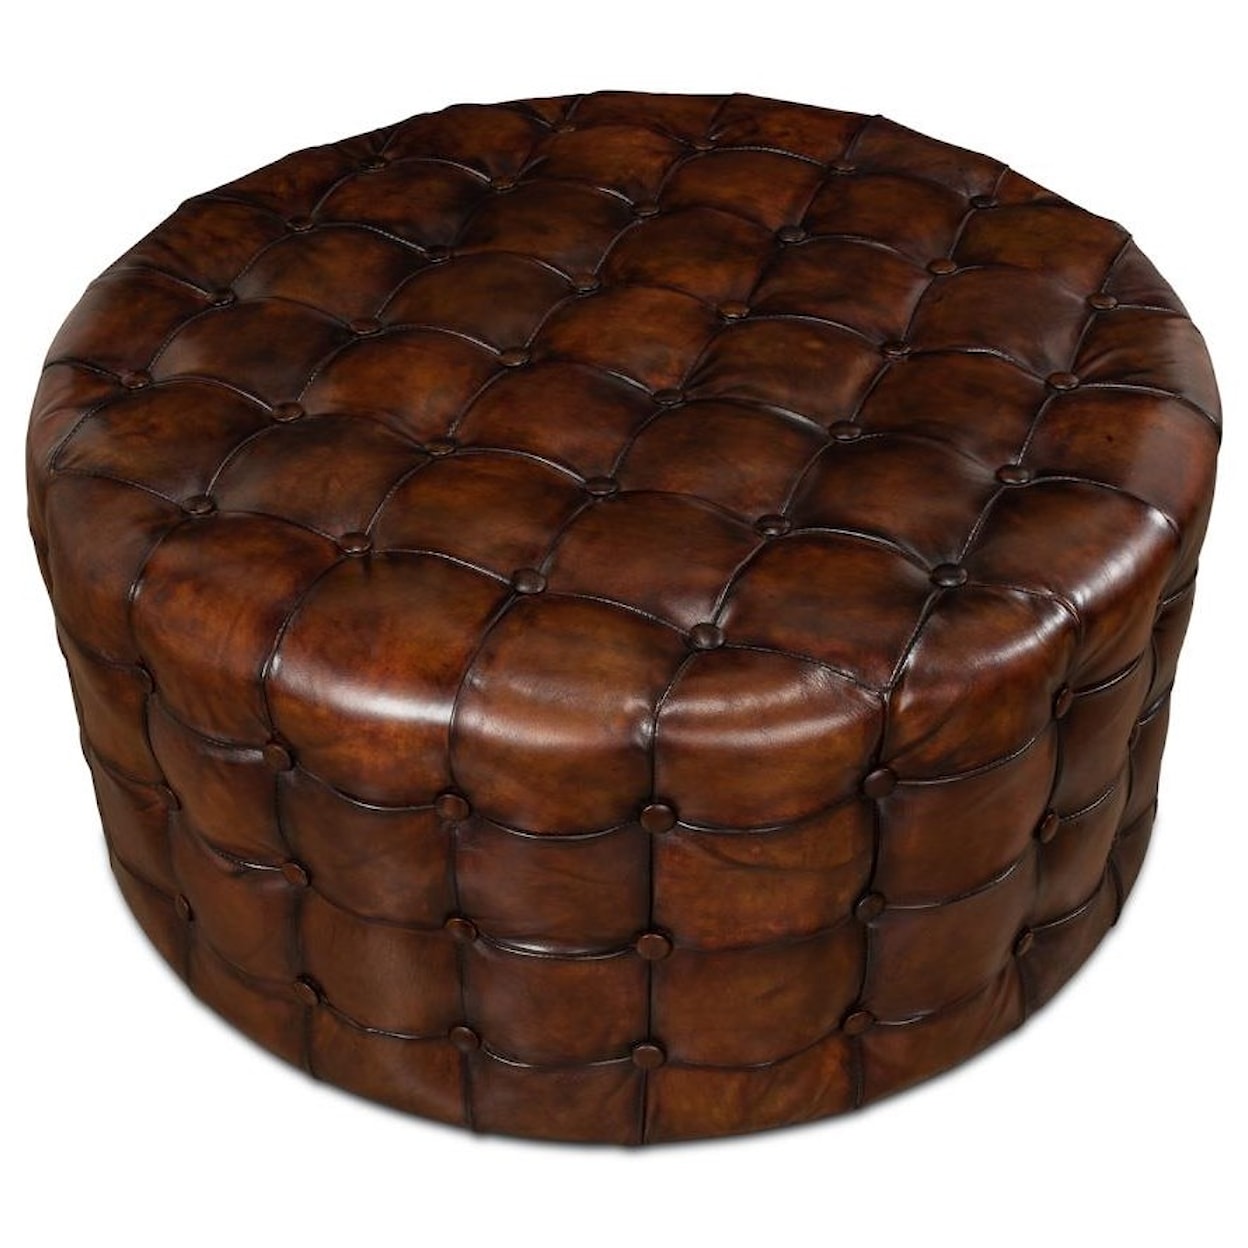 Sarreid Ltd Benches, Stools and Ottomans Leather Tufted Ottoman